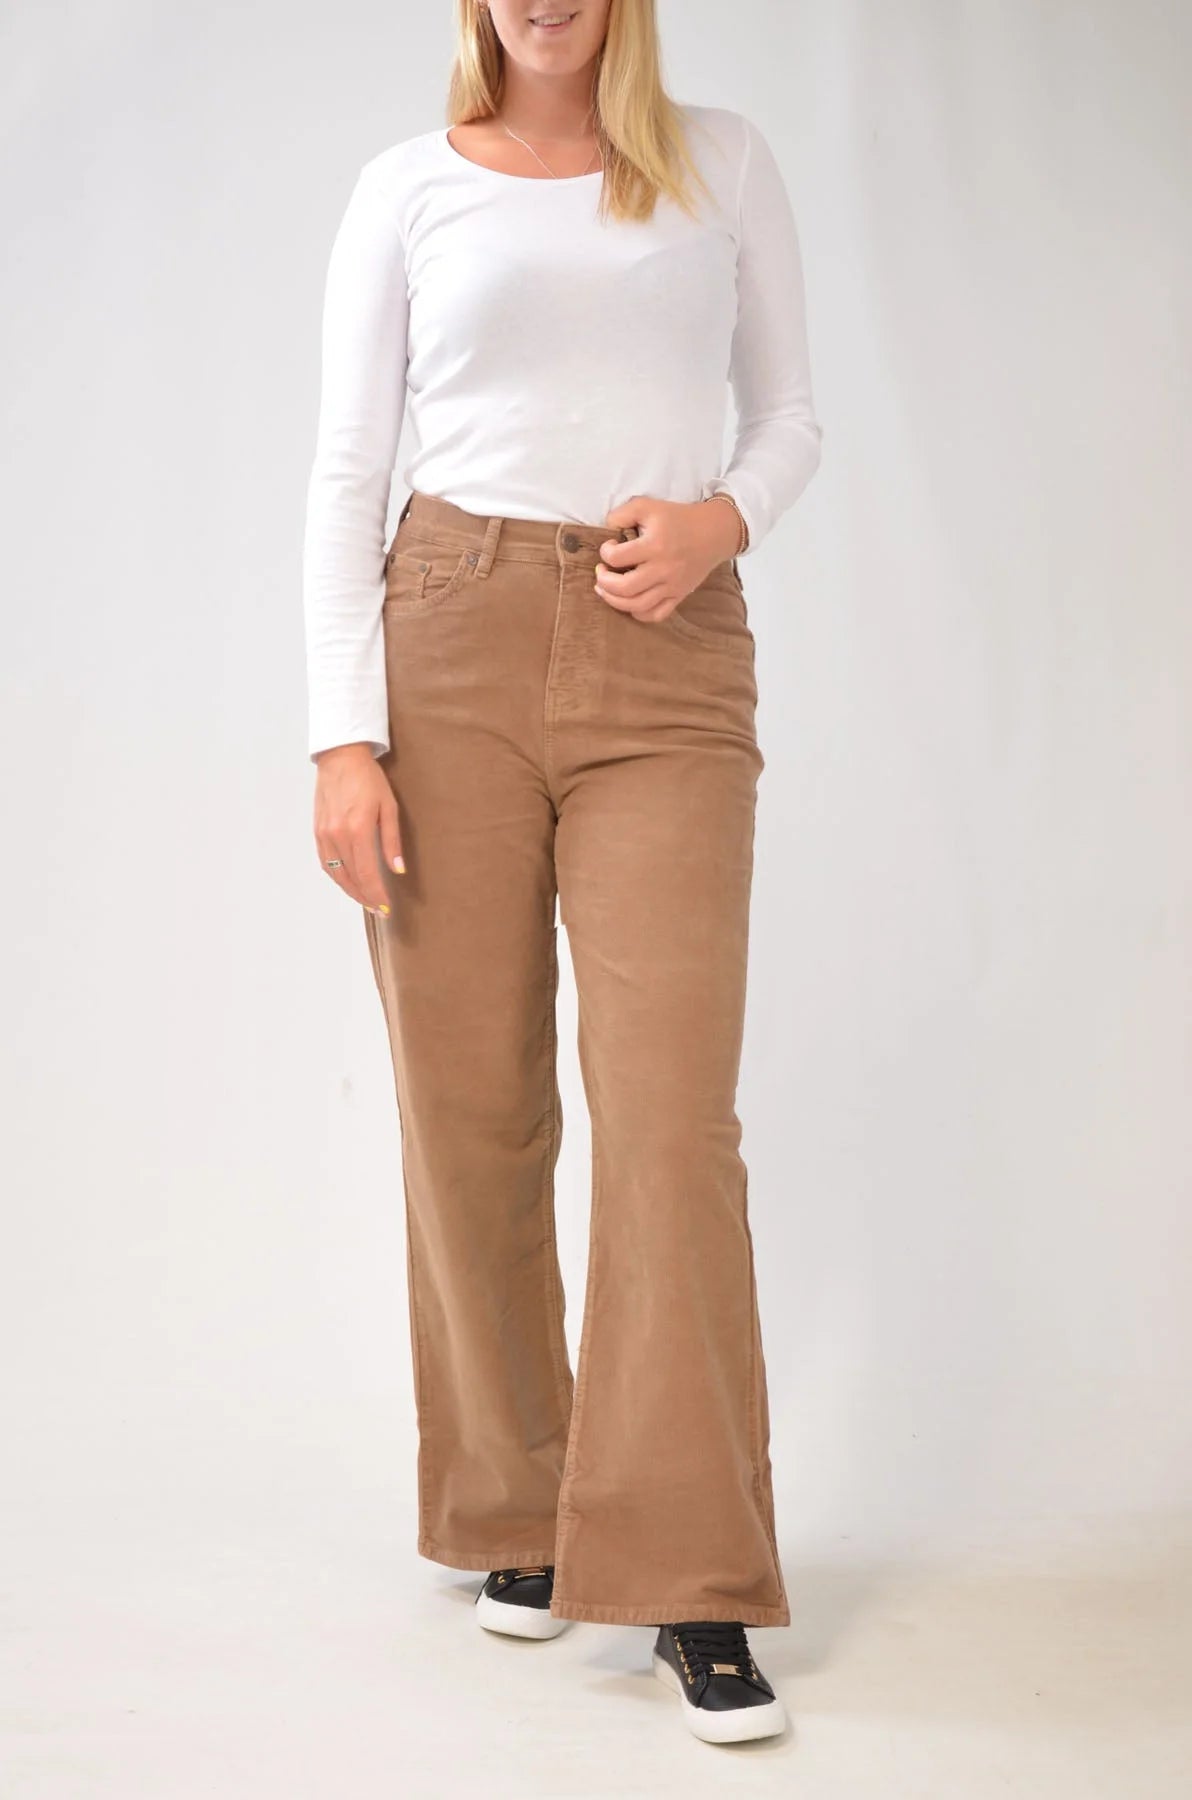 M&S Autograph High Waisted Flare Corduroy Trousers